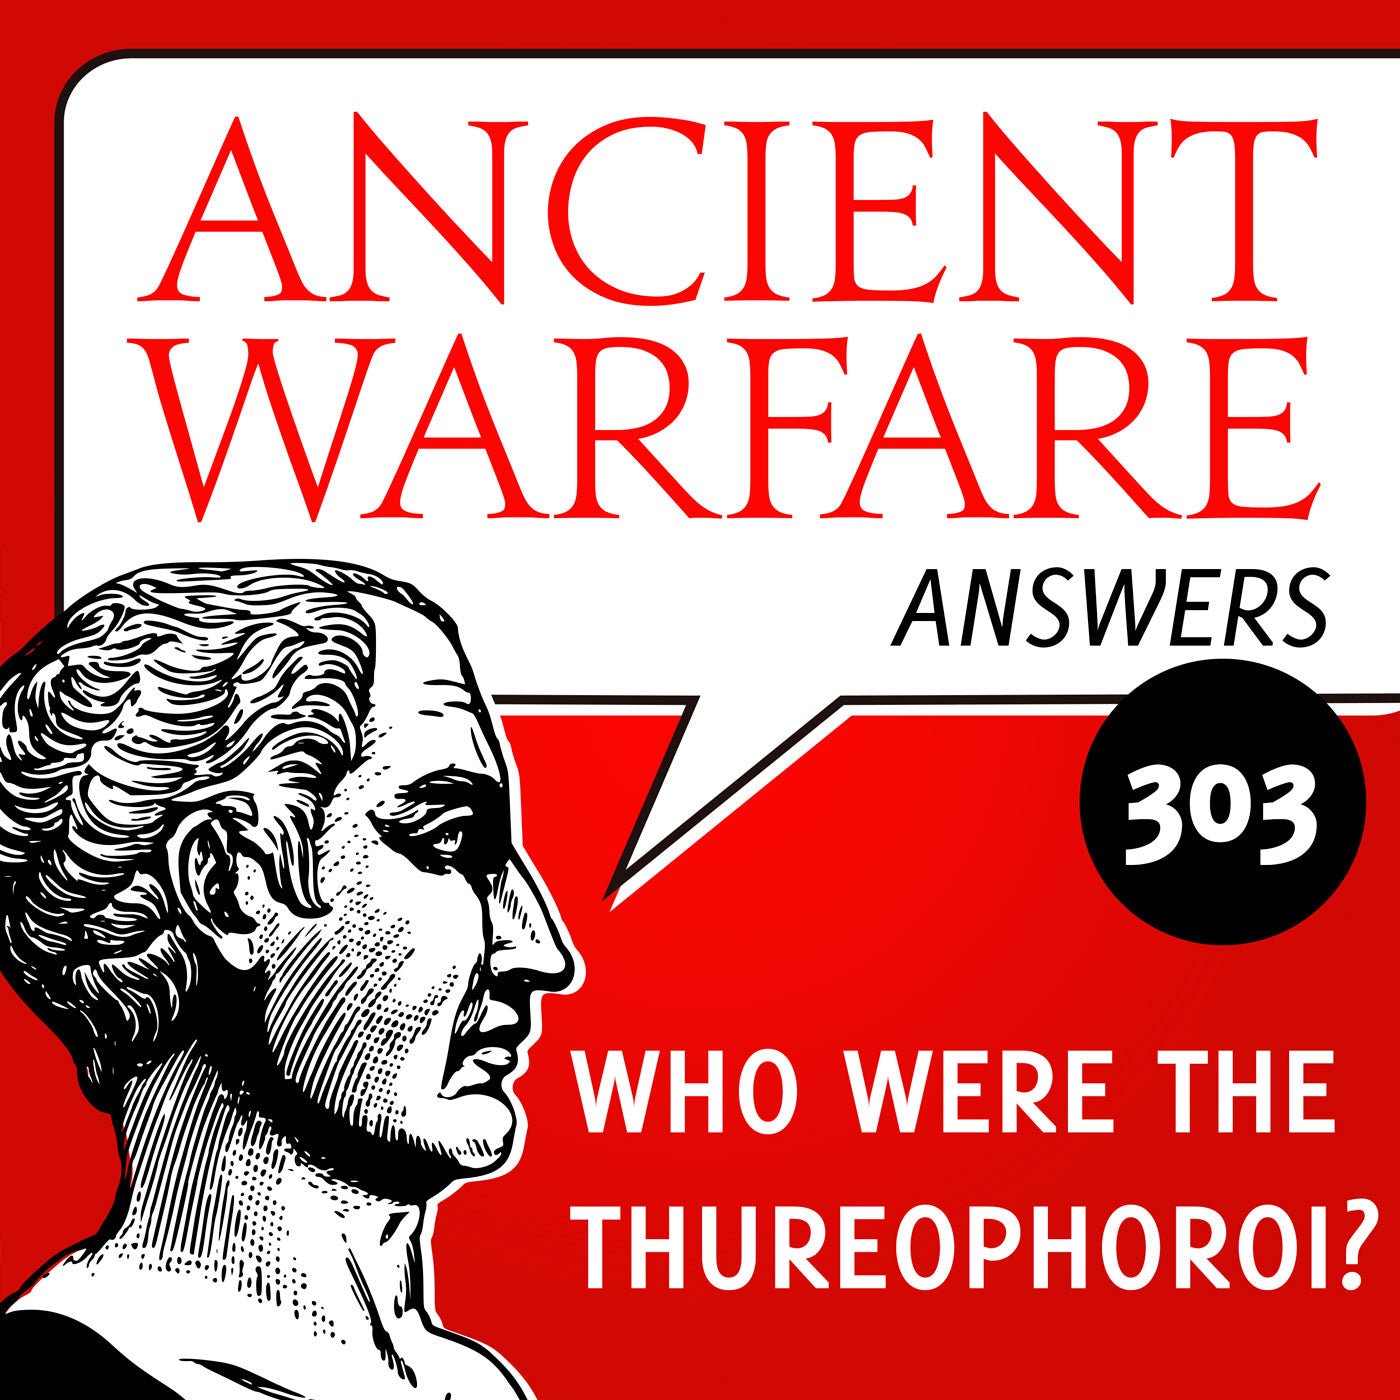 Ancient Warfare Answers (303): Who were the Thureophoroi?